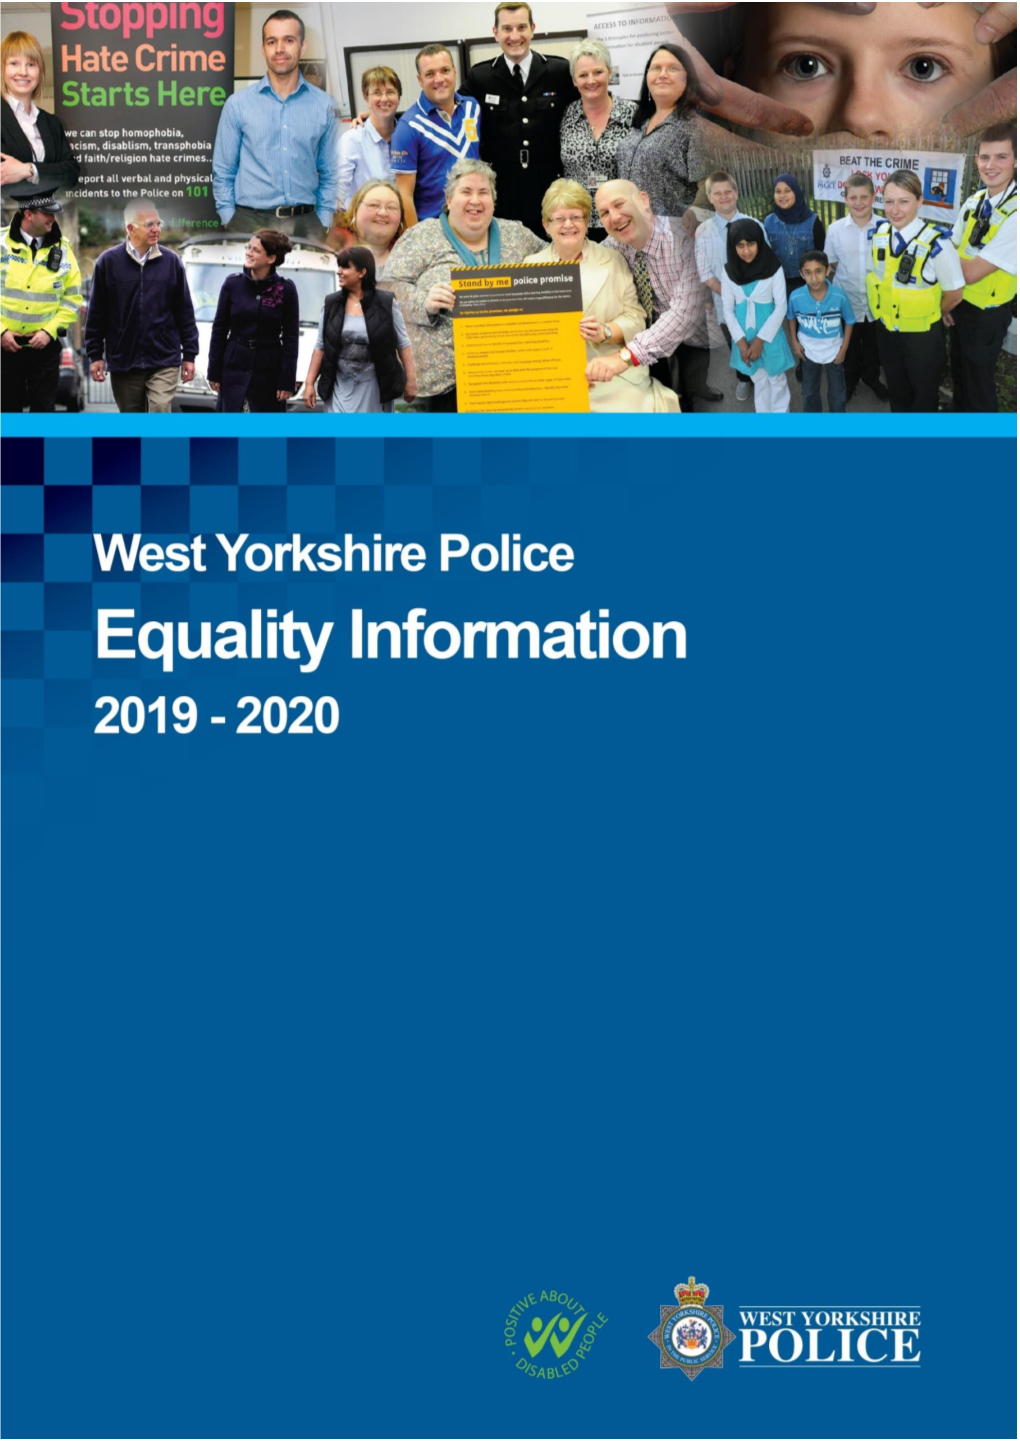 West Yorkshire Police Equality Information 2019-2020